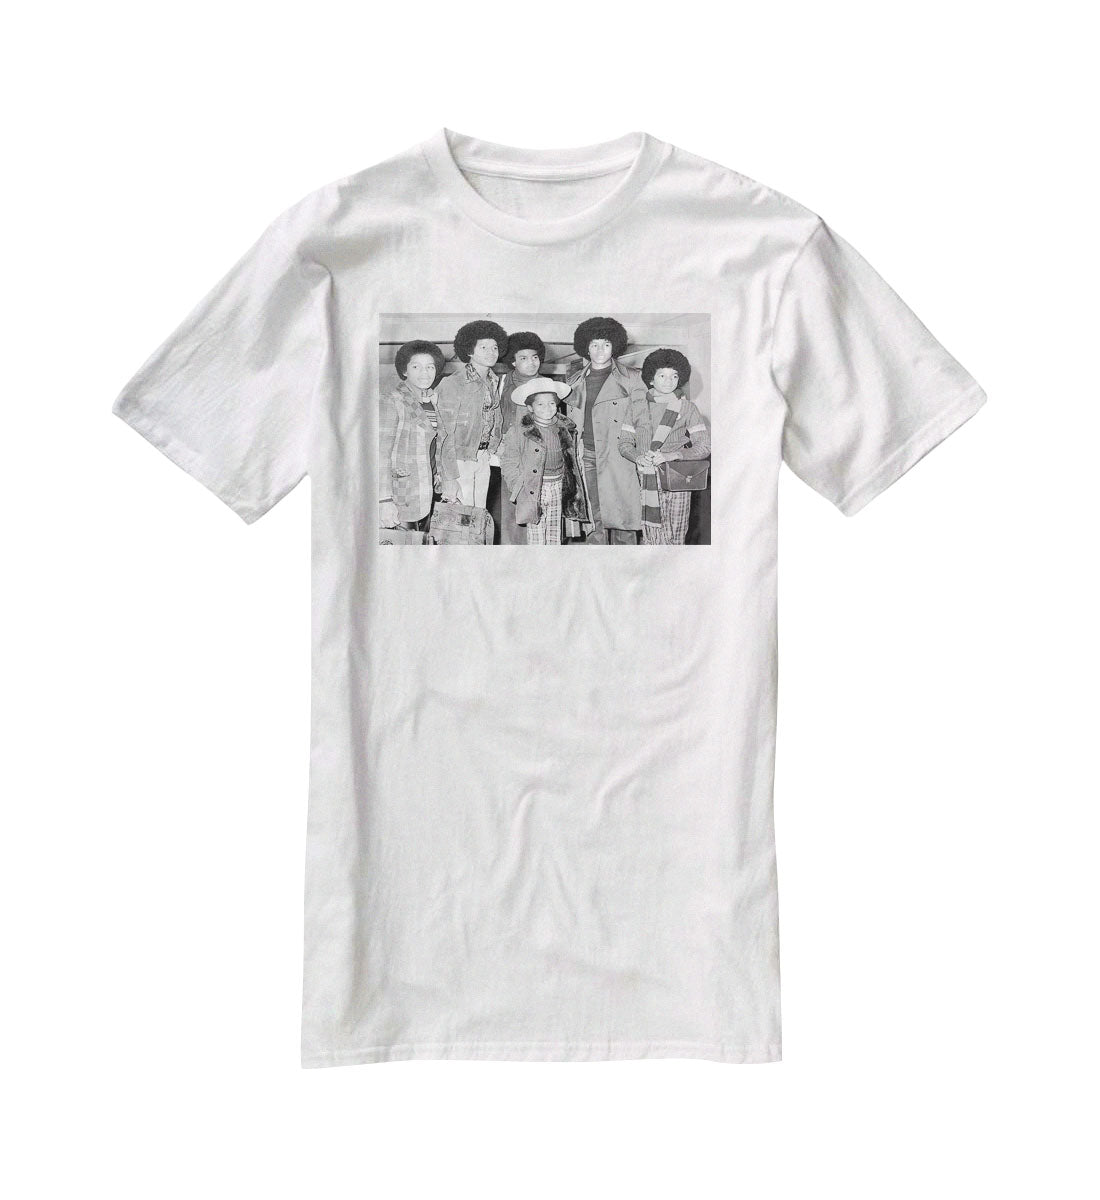 The Jackson Five Marlon Jackie Tito Jermaine Michael and in front 9 year old Randy T-Shirt - Canvas Art Rocks - 5